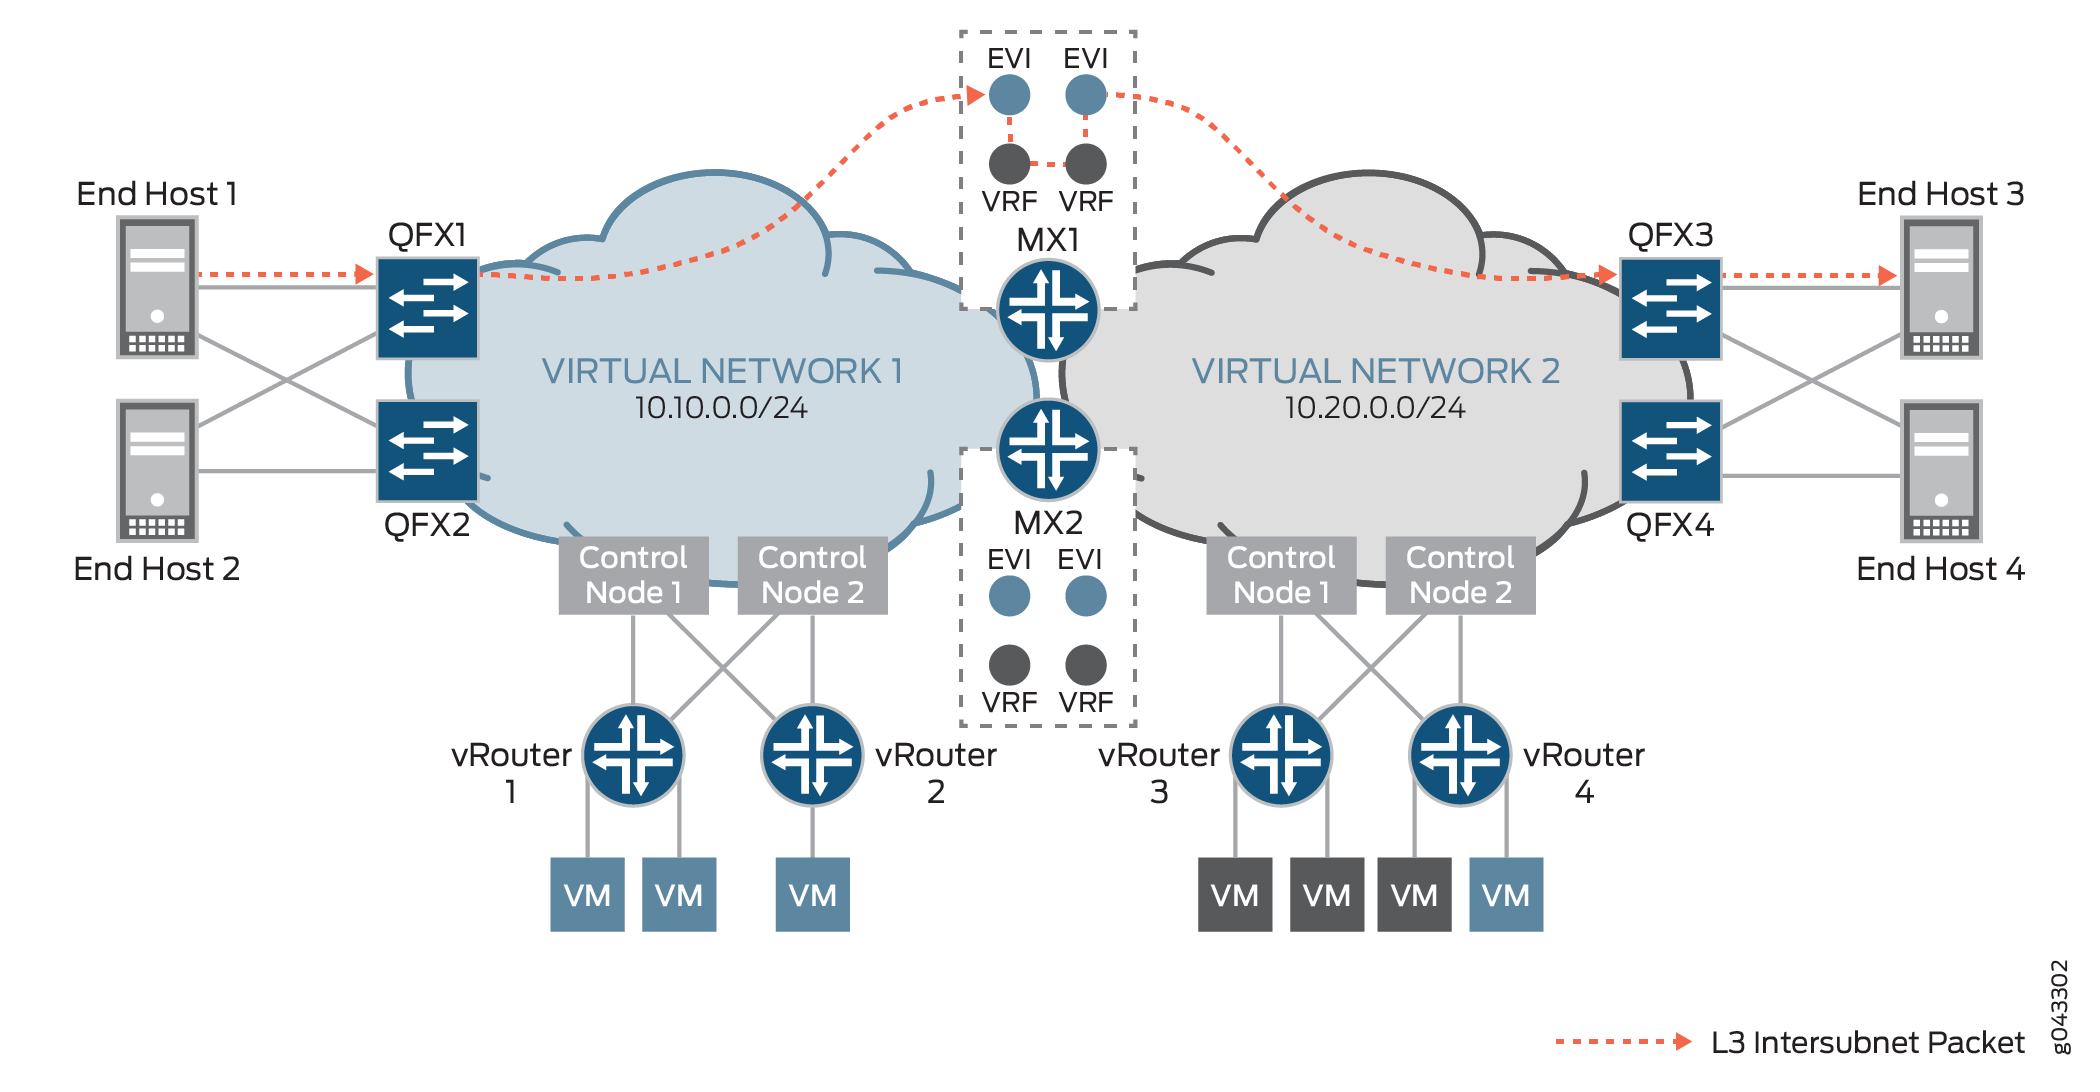 Handling Known Unicast Traffic Between Virtual Networks